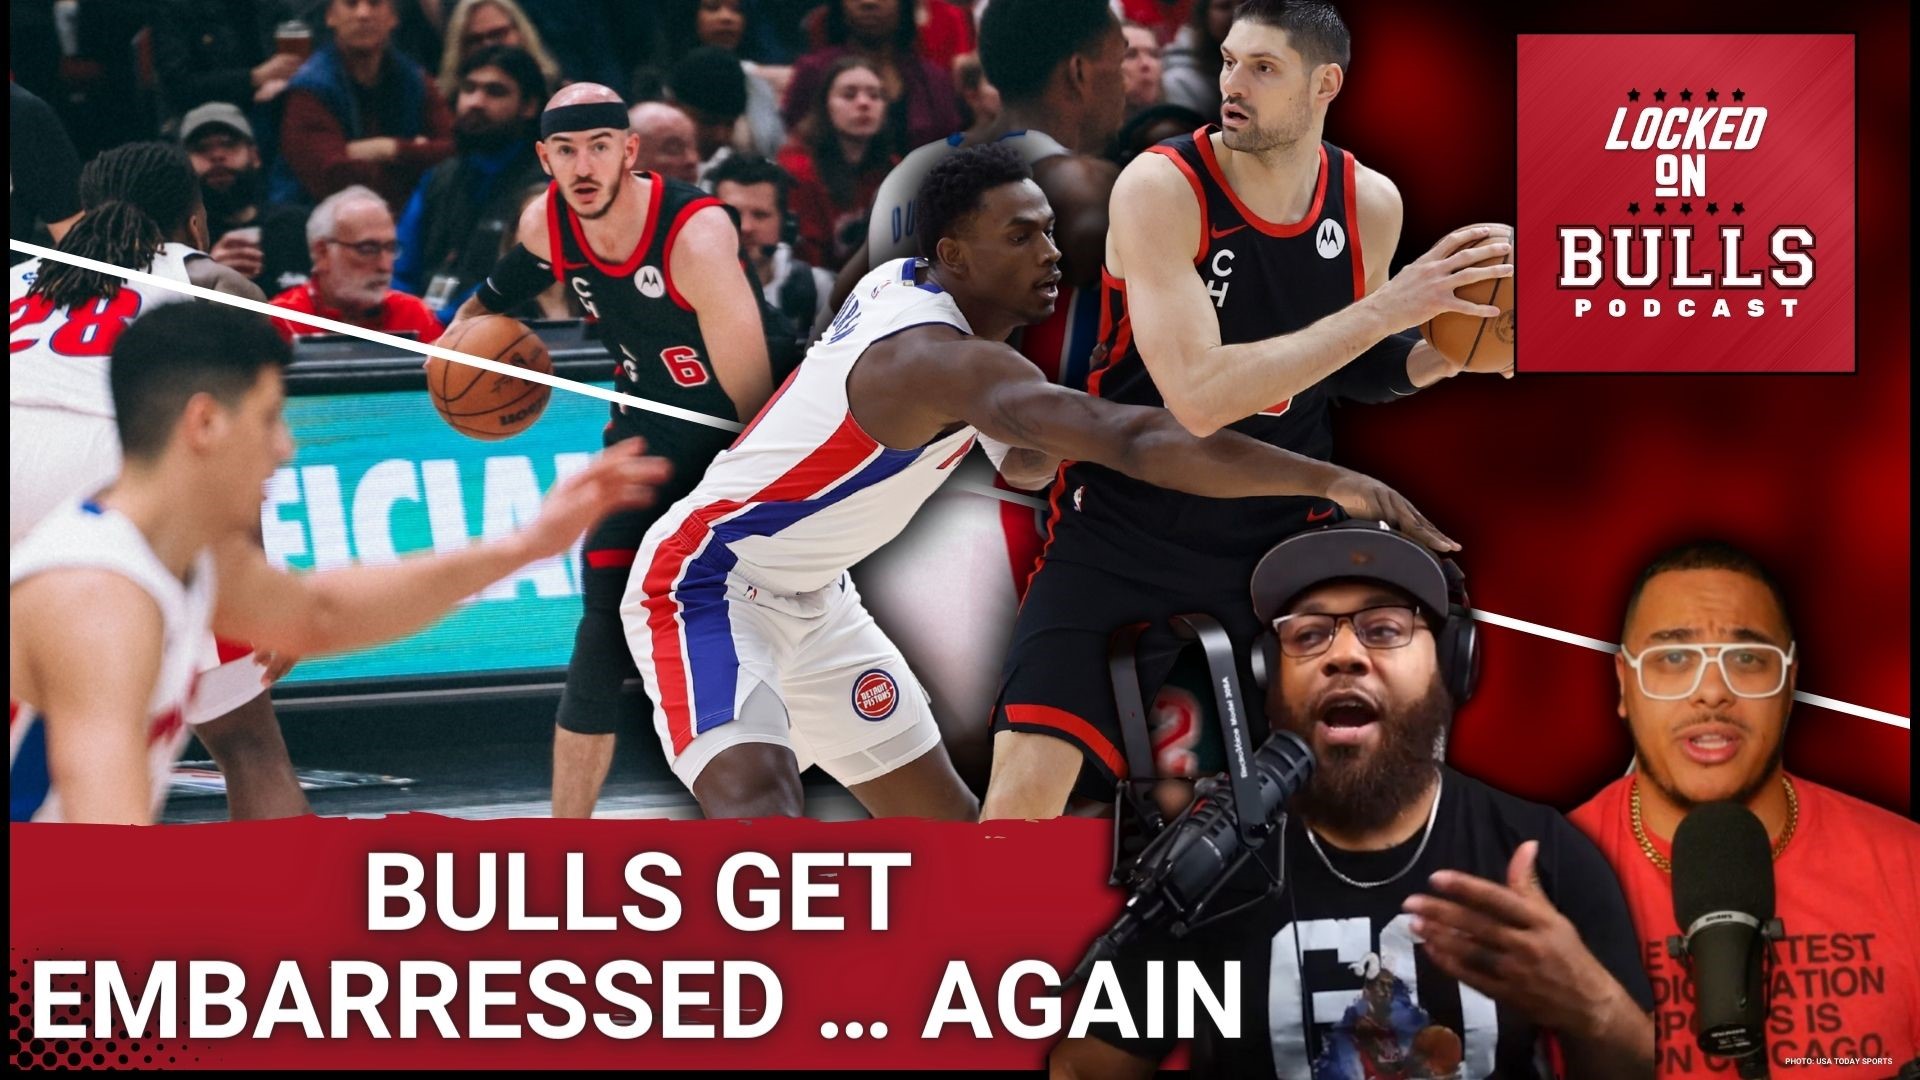 Haize & Pat The Designer discuss the Bulls setting history in the wrong way during their loss to the Pistons. The guys also ask if it's time to be concerned about Co